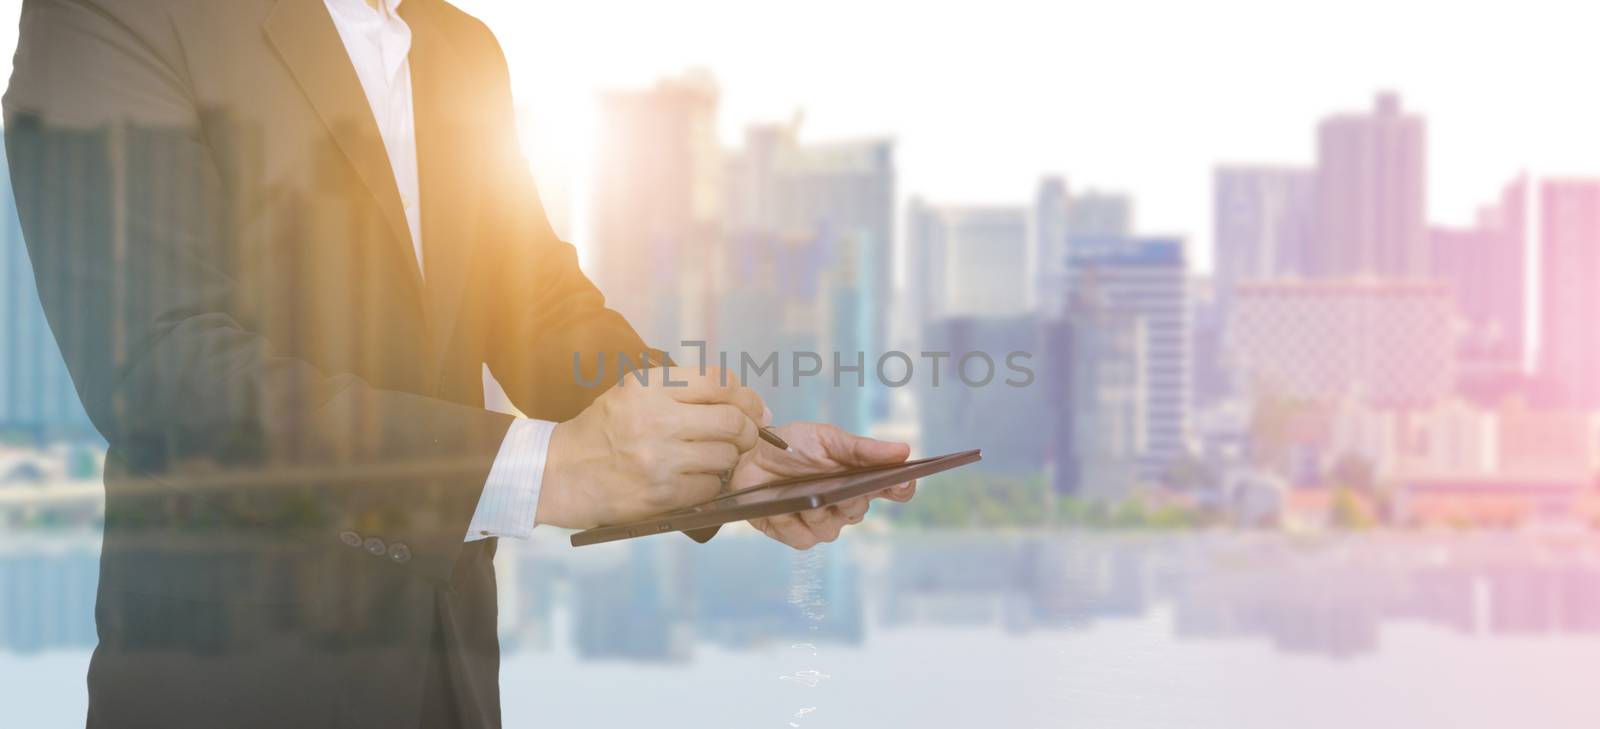 Businessman Men Analysis Graph With Technology City Background by sompongtom